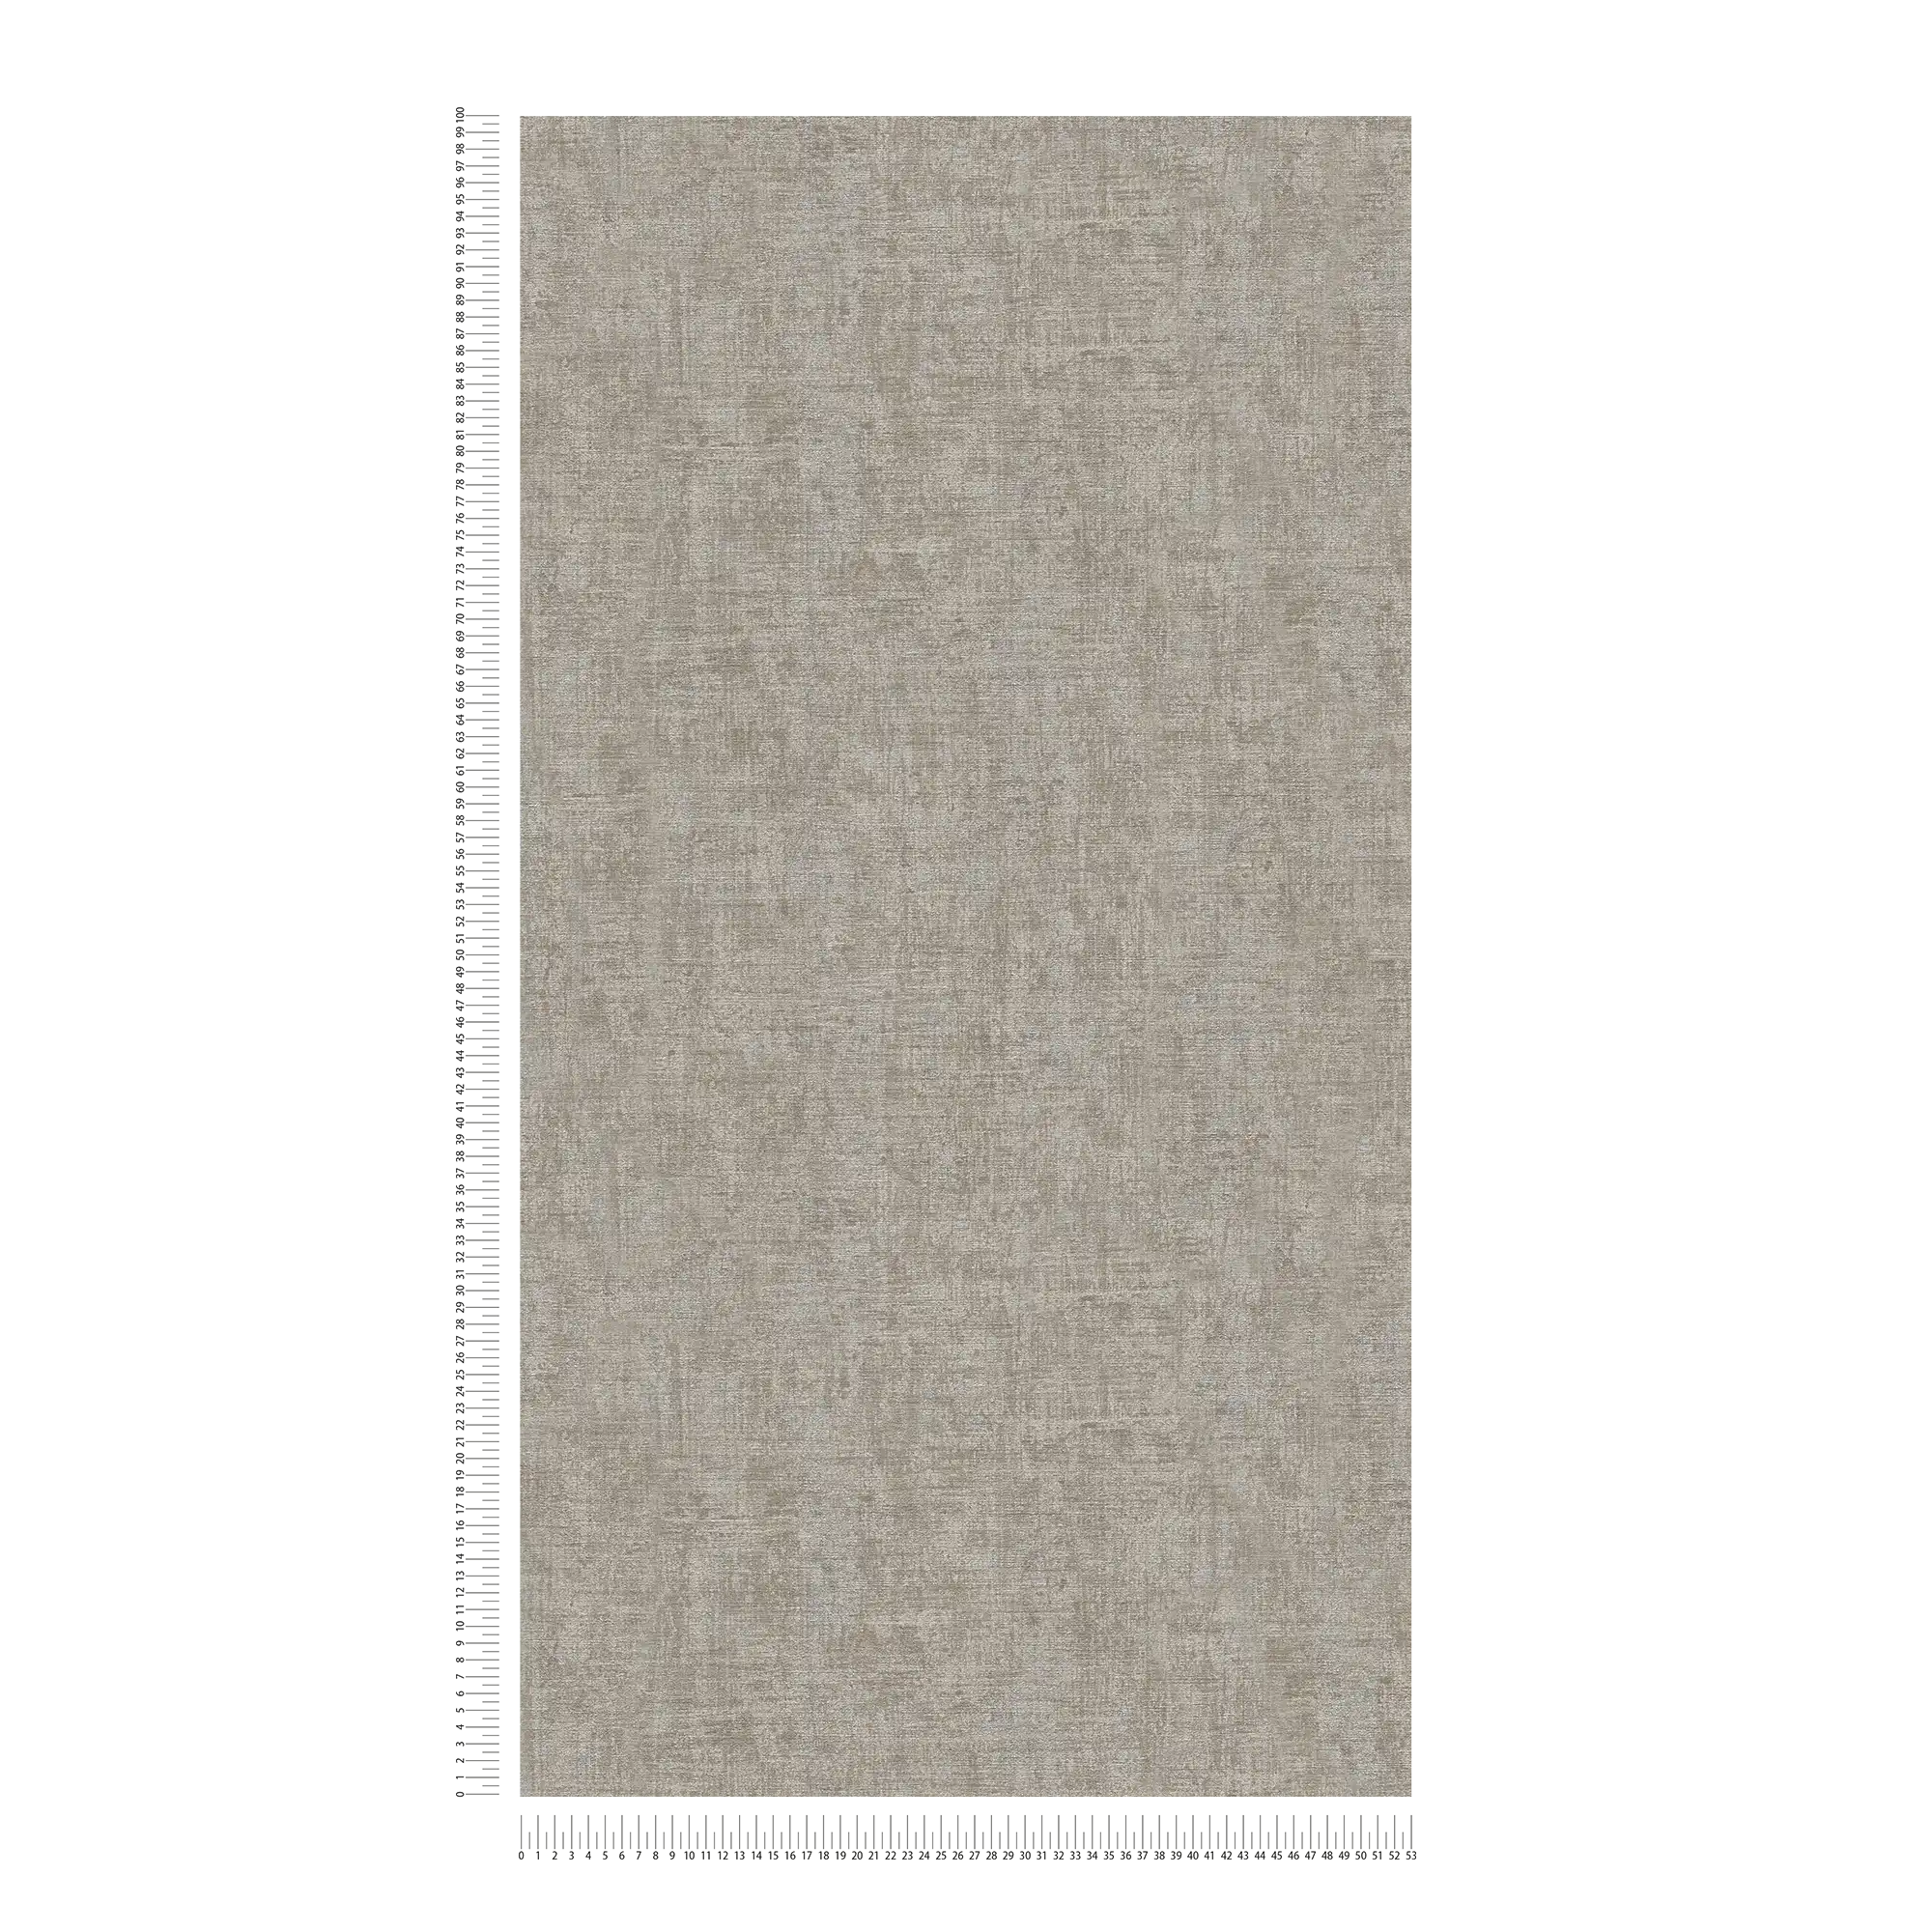             Brown wallpaper mottled with silver metallic accents
        